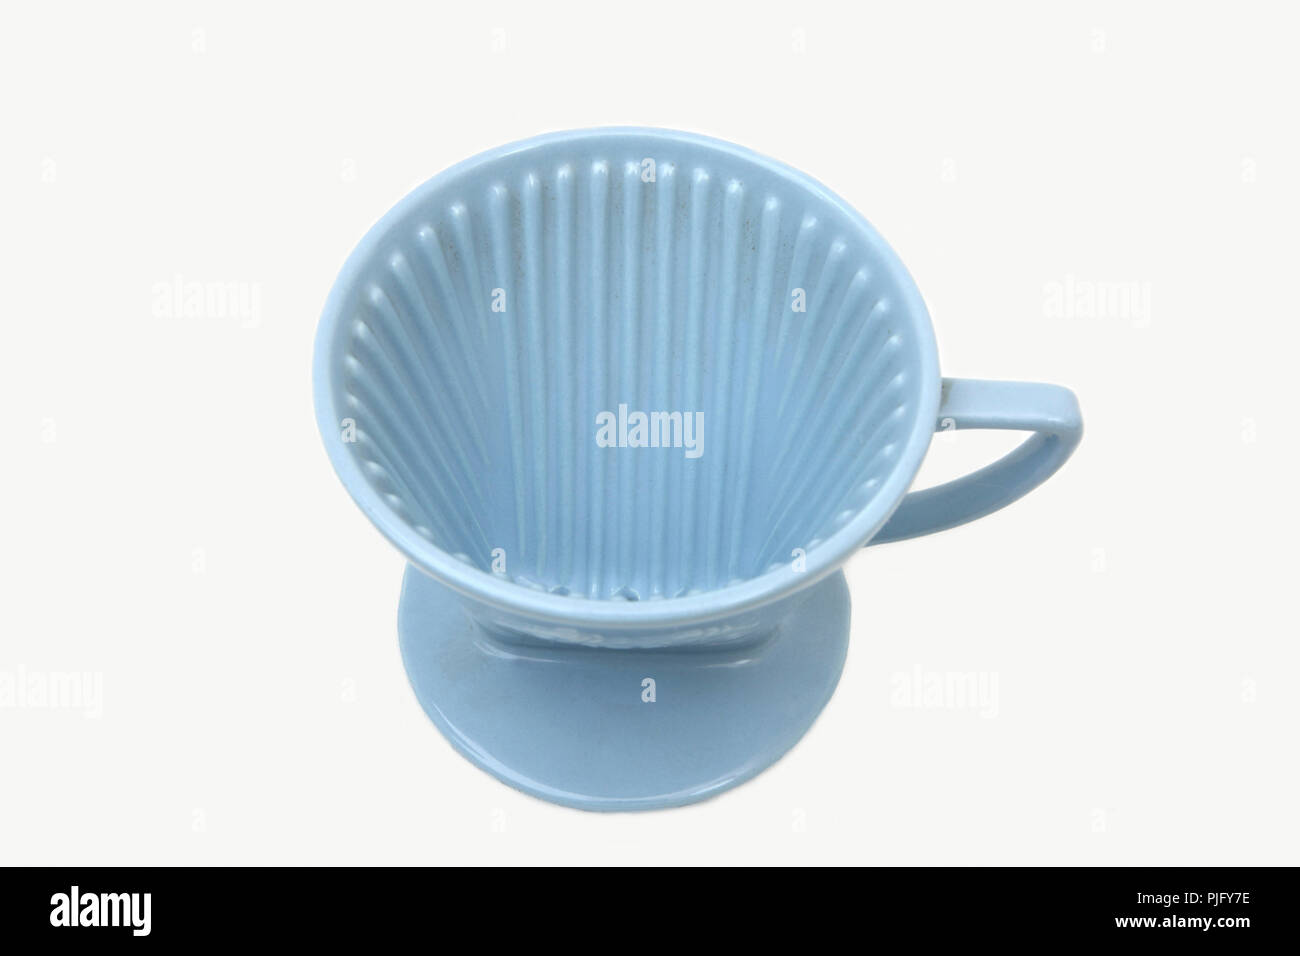 Melitta Filter High Resolution Stock Photography and Images - Alamy